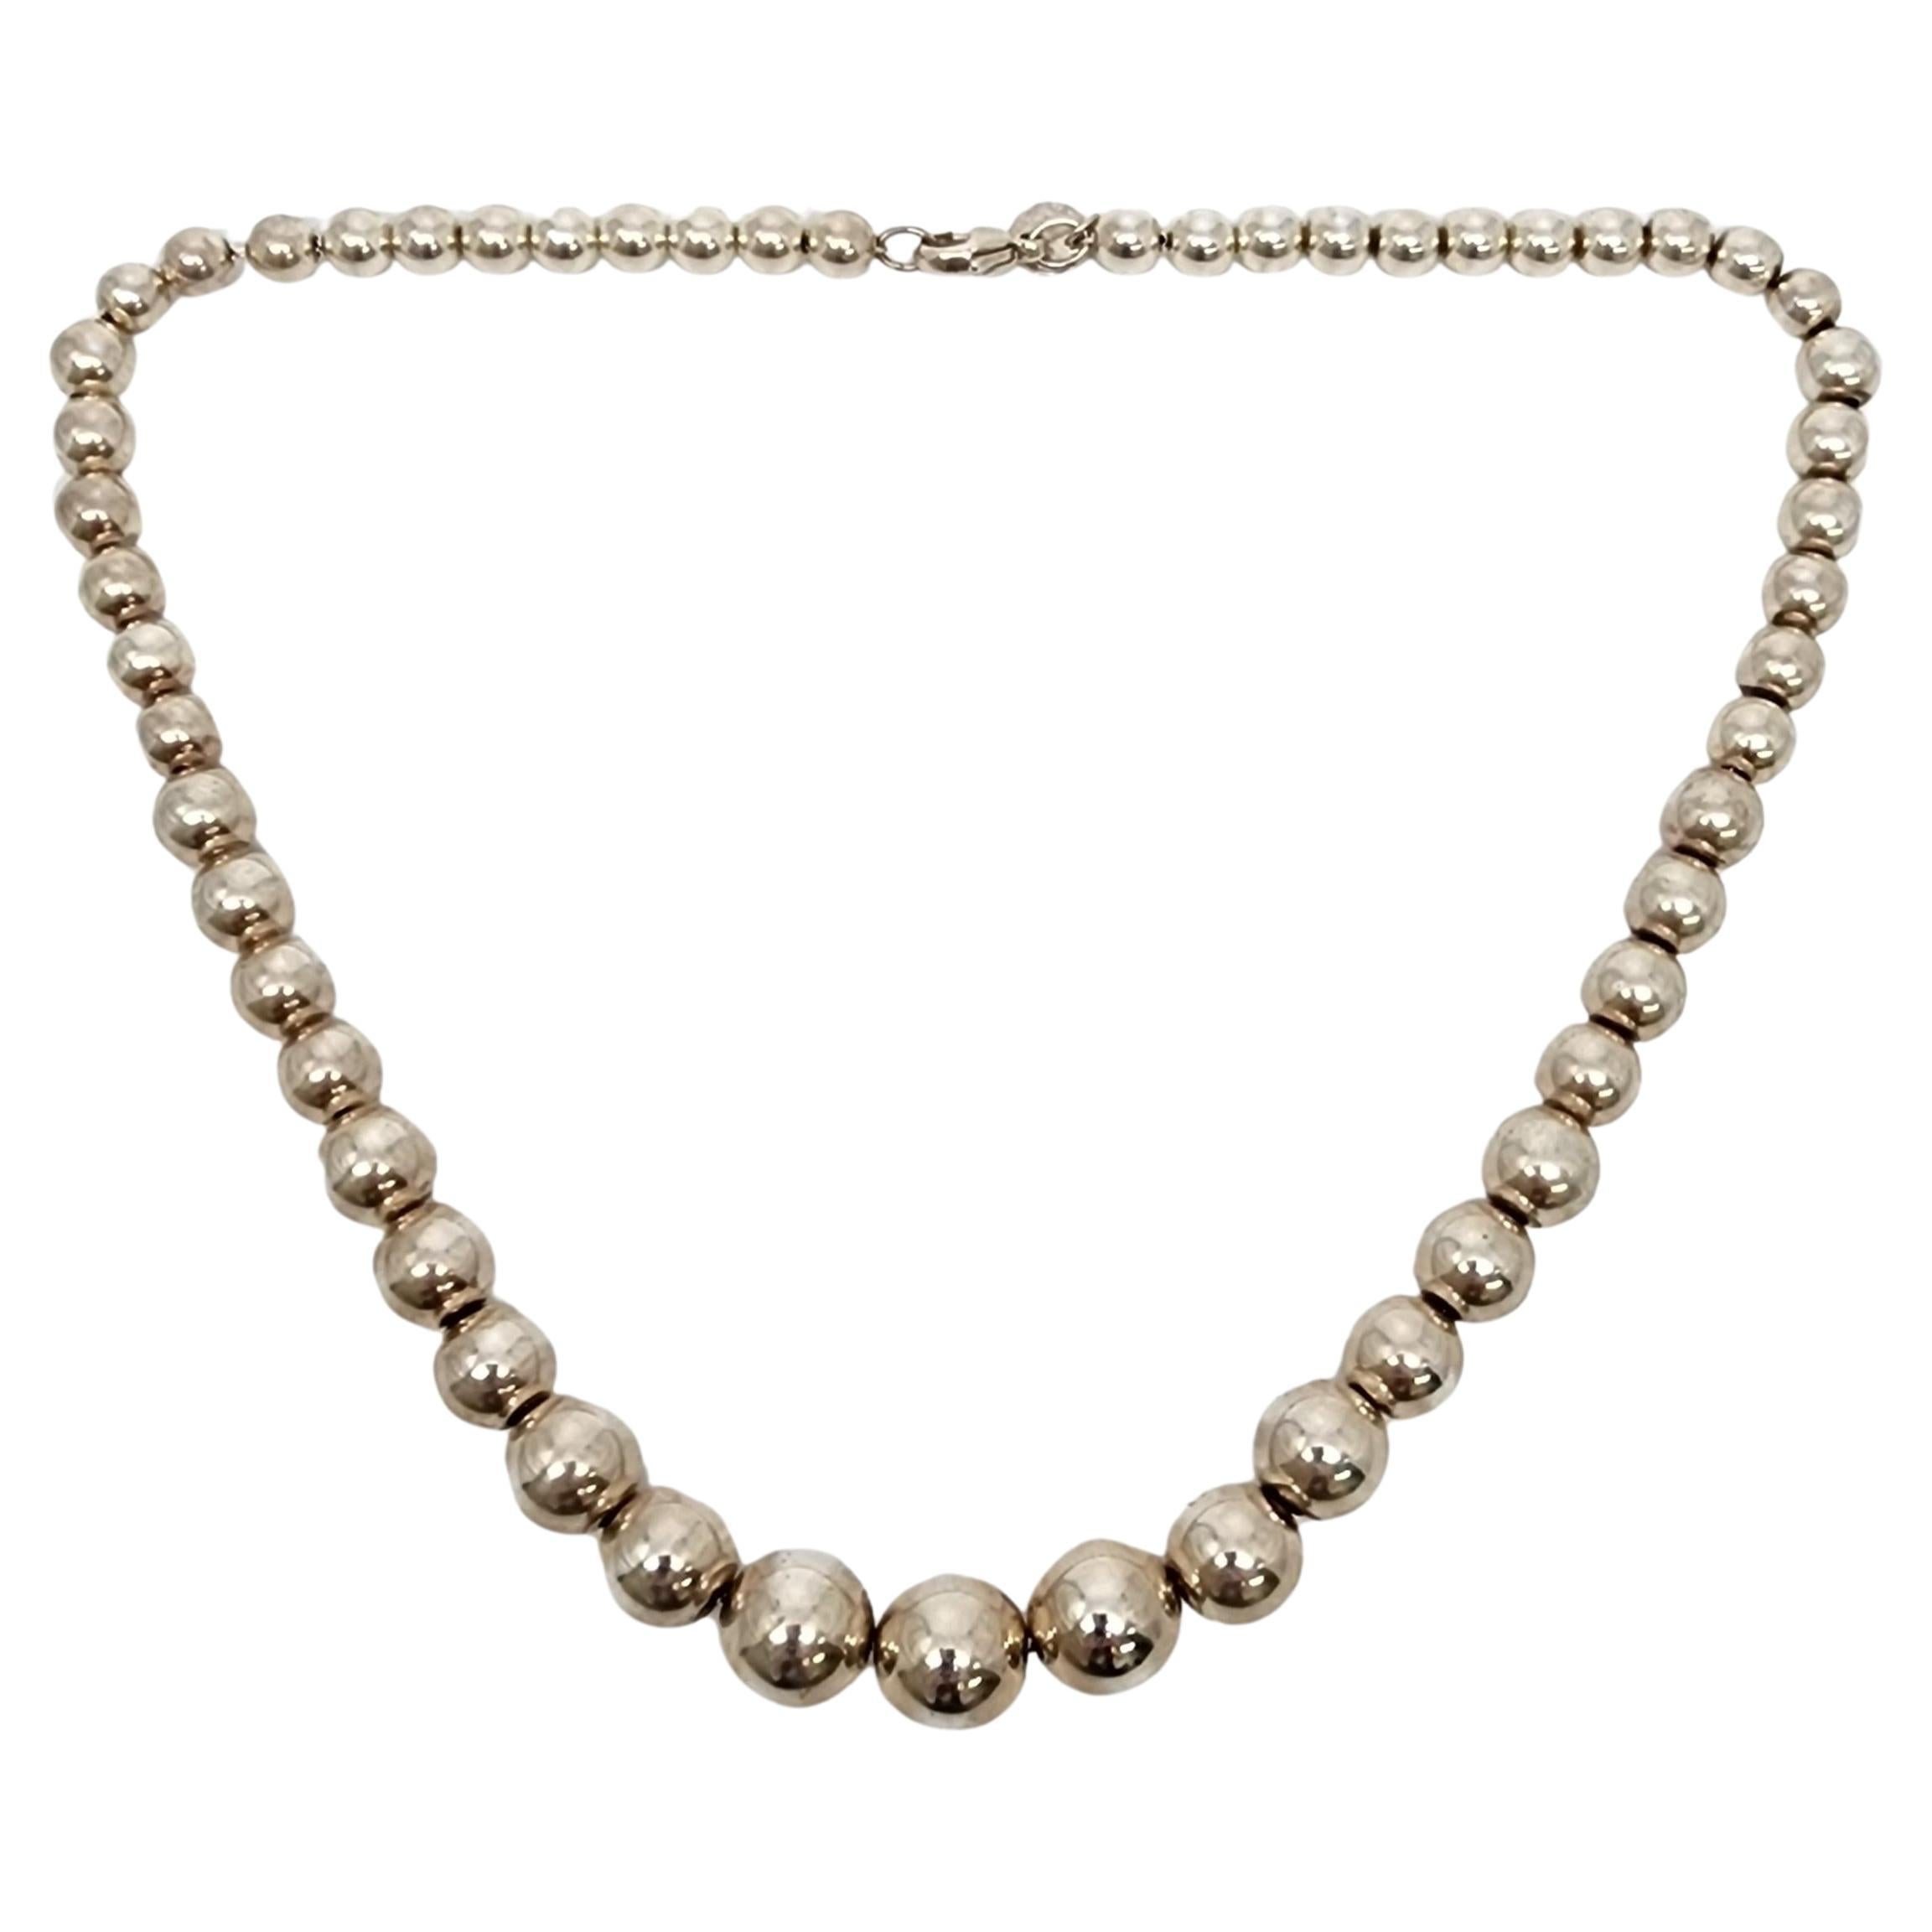 Tiffany & Co Sterling Silver Graduated Ball Bead Necklace 16" #17253